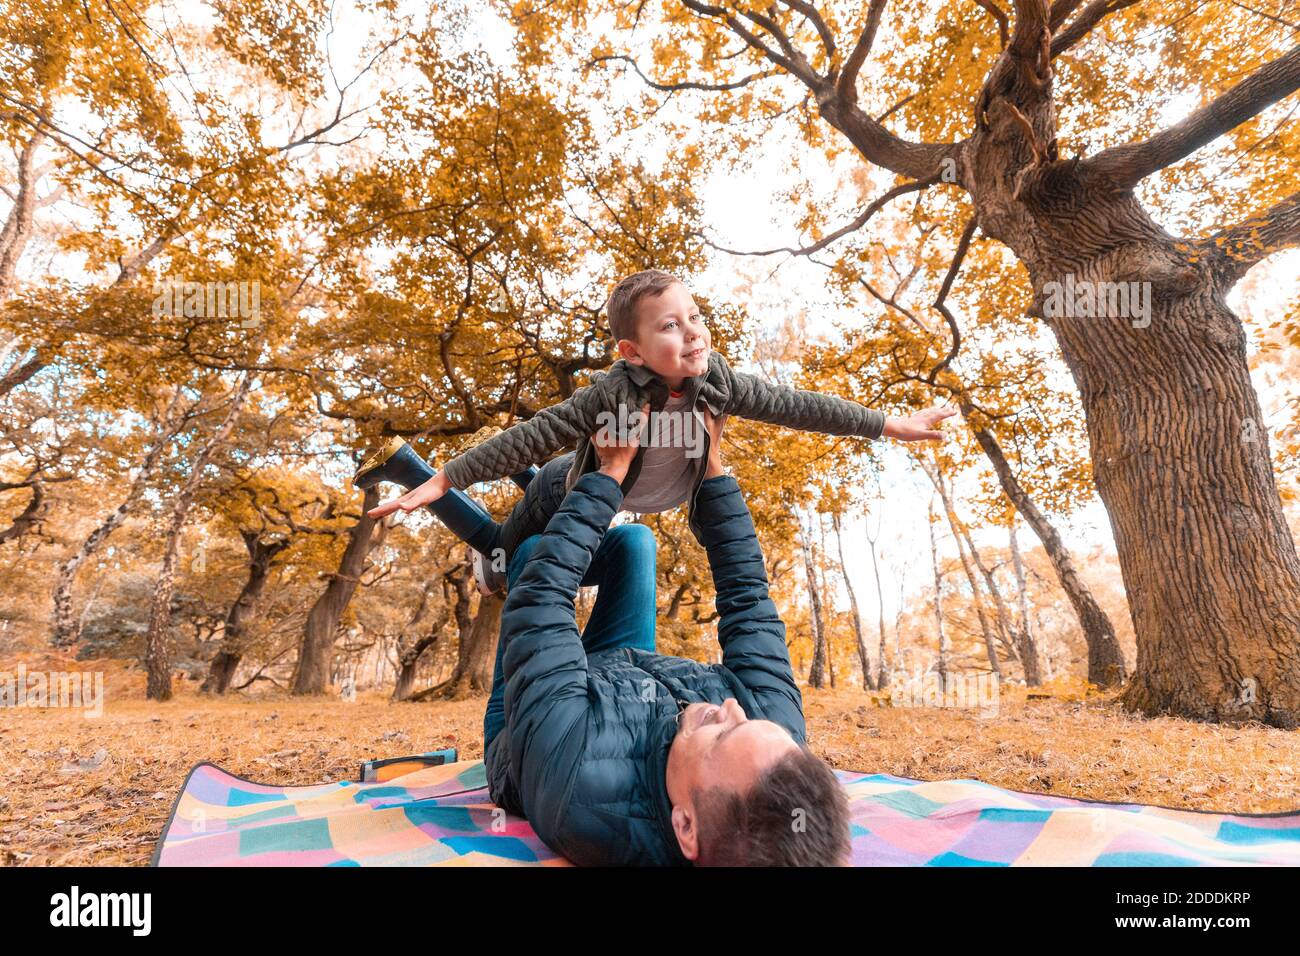 Boy imagining himself flying held by father lying on picnic blanket at park during autumn Stock Photo